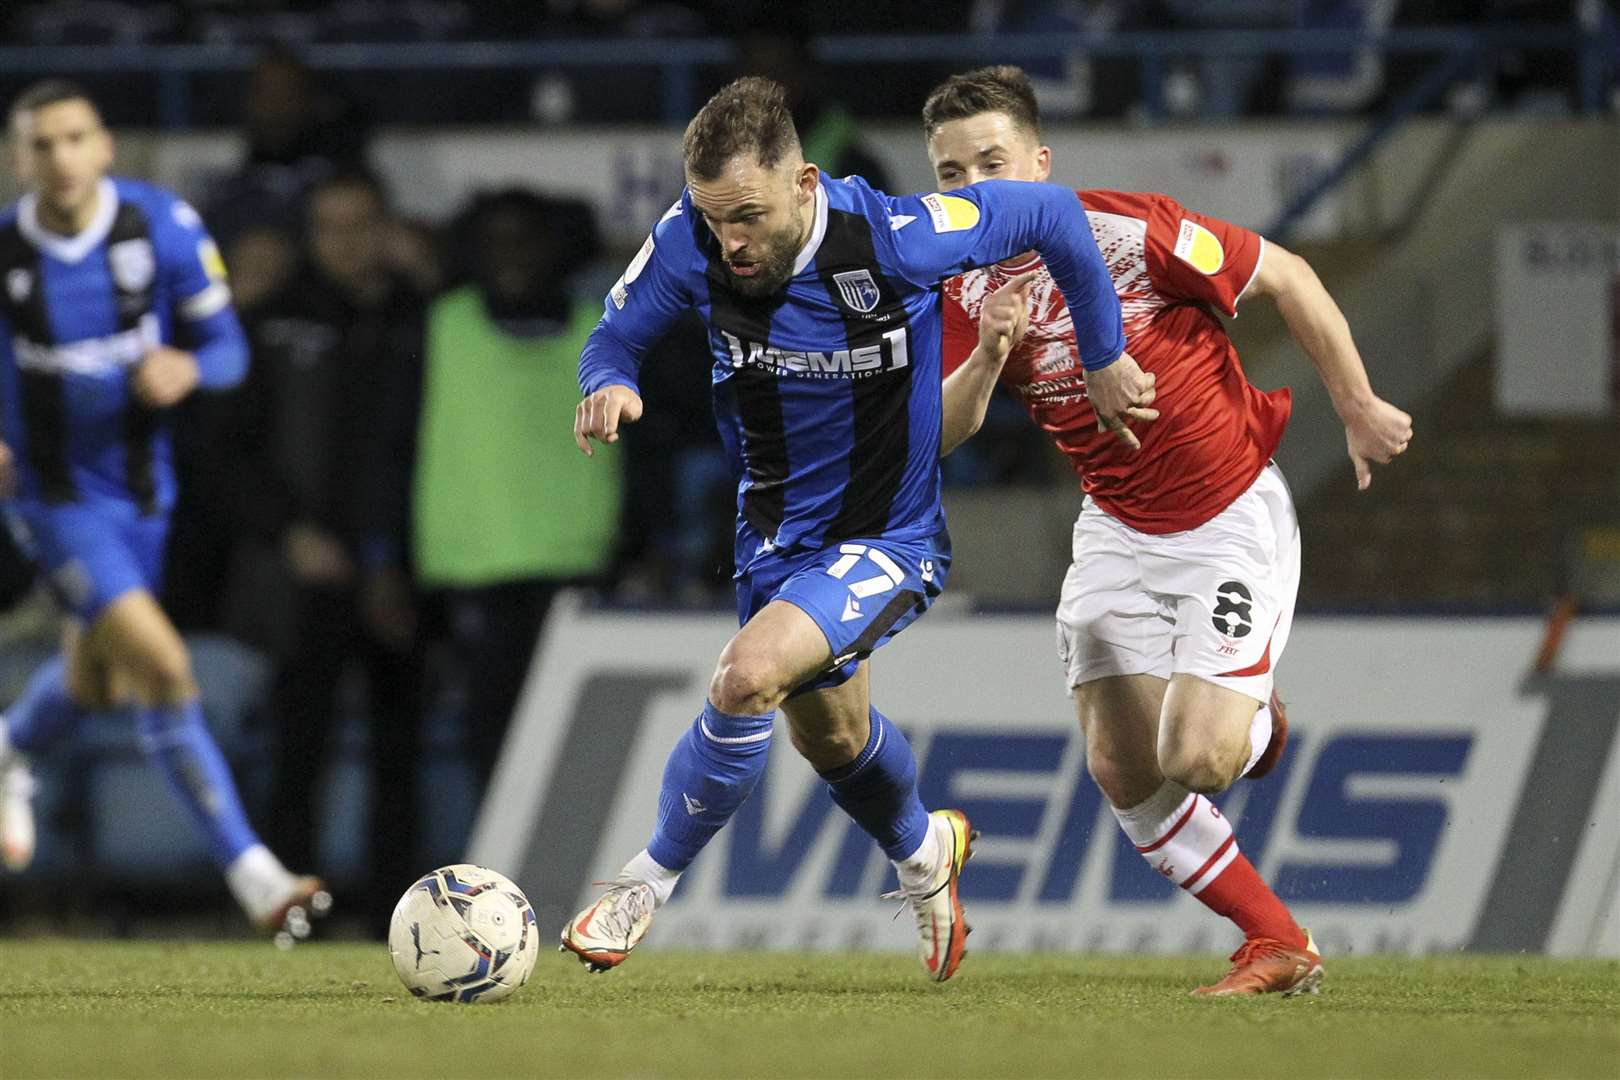 Danny Lloyd in action for Gillingham. He's impressed since signing for Rochdale as a free agent